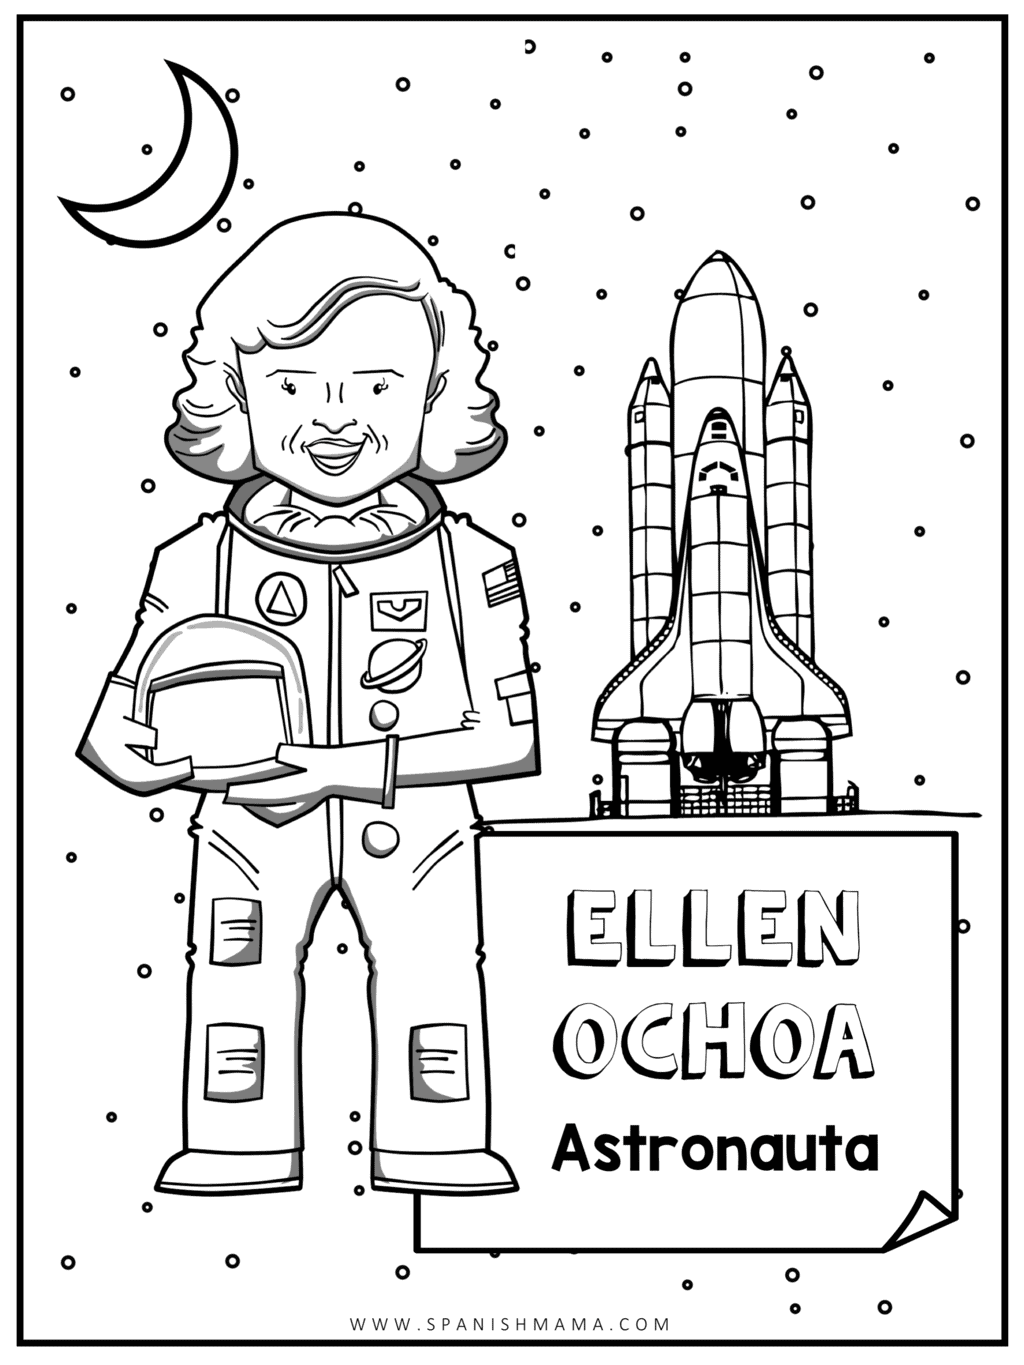 free-hispanic-heritage-month-coloring-pages